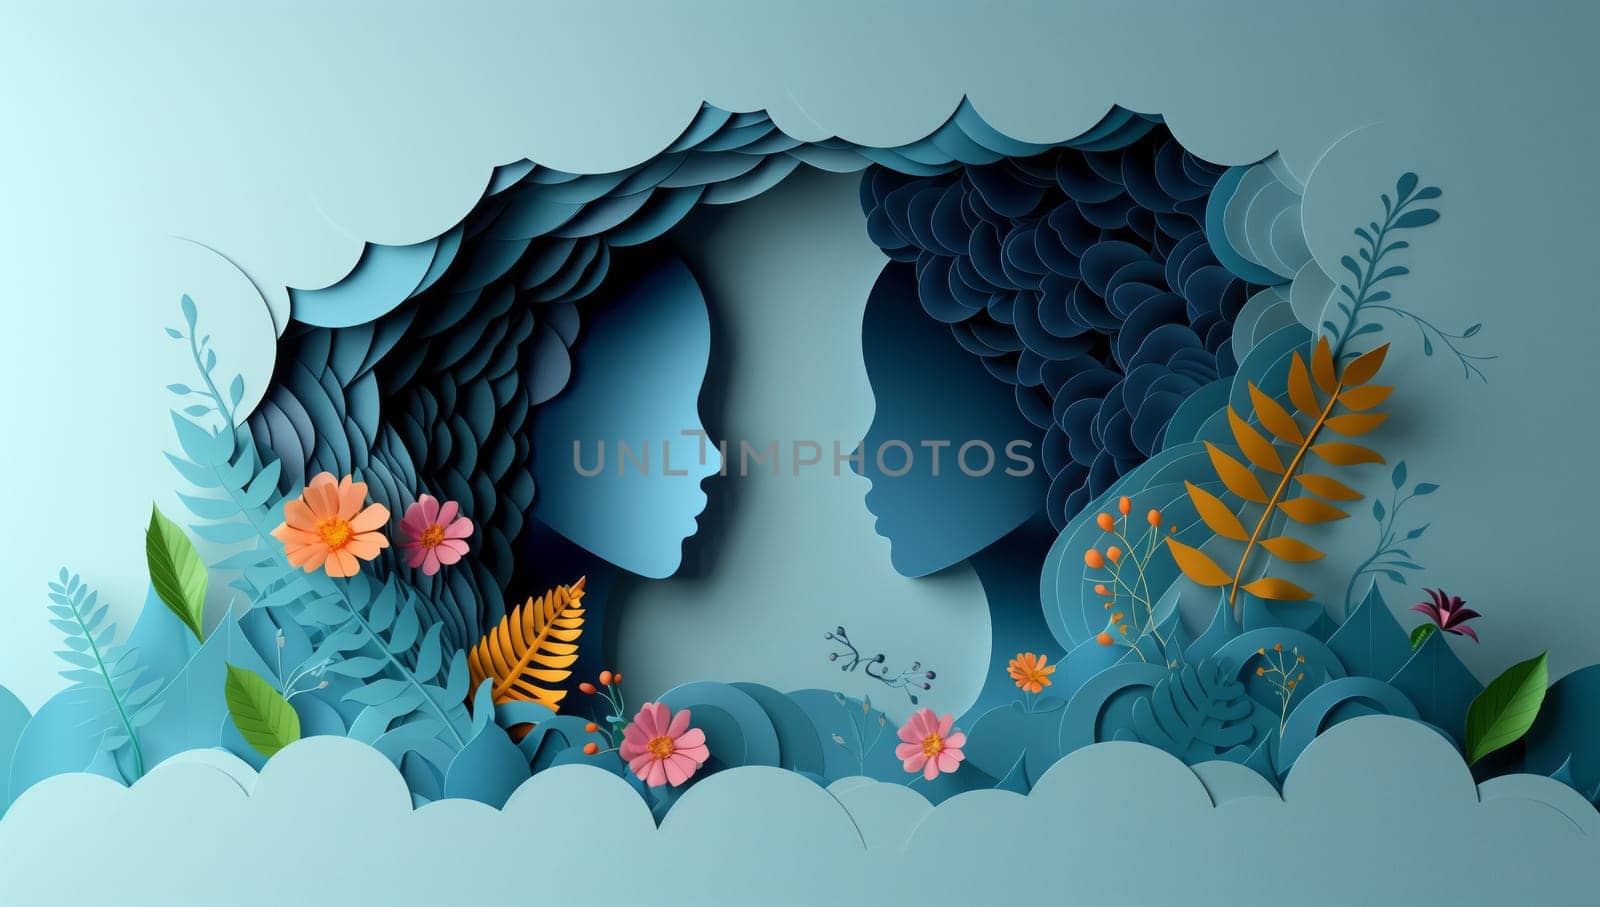 A paper cut out of two womens faces with electric blue flower and leaf patterns, resembling a fashion accessory, in a natural landscape design